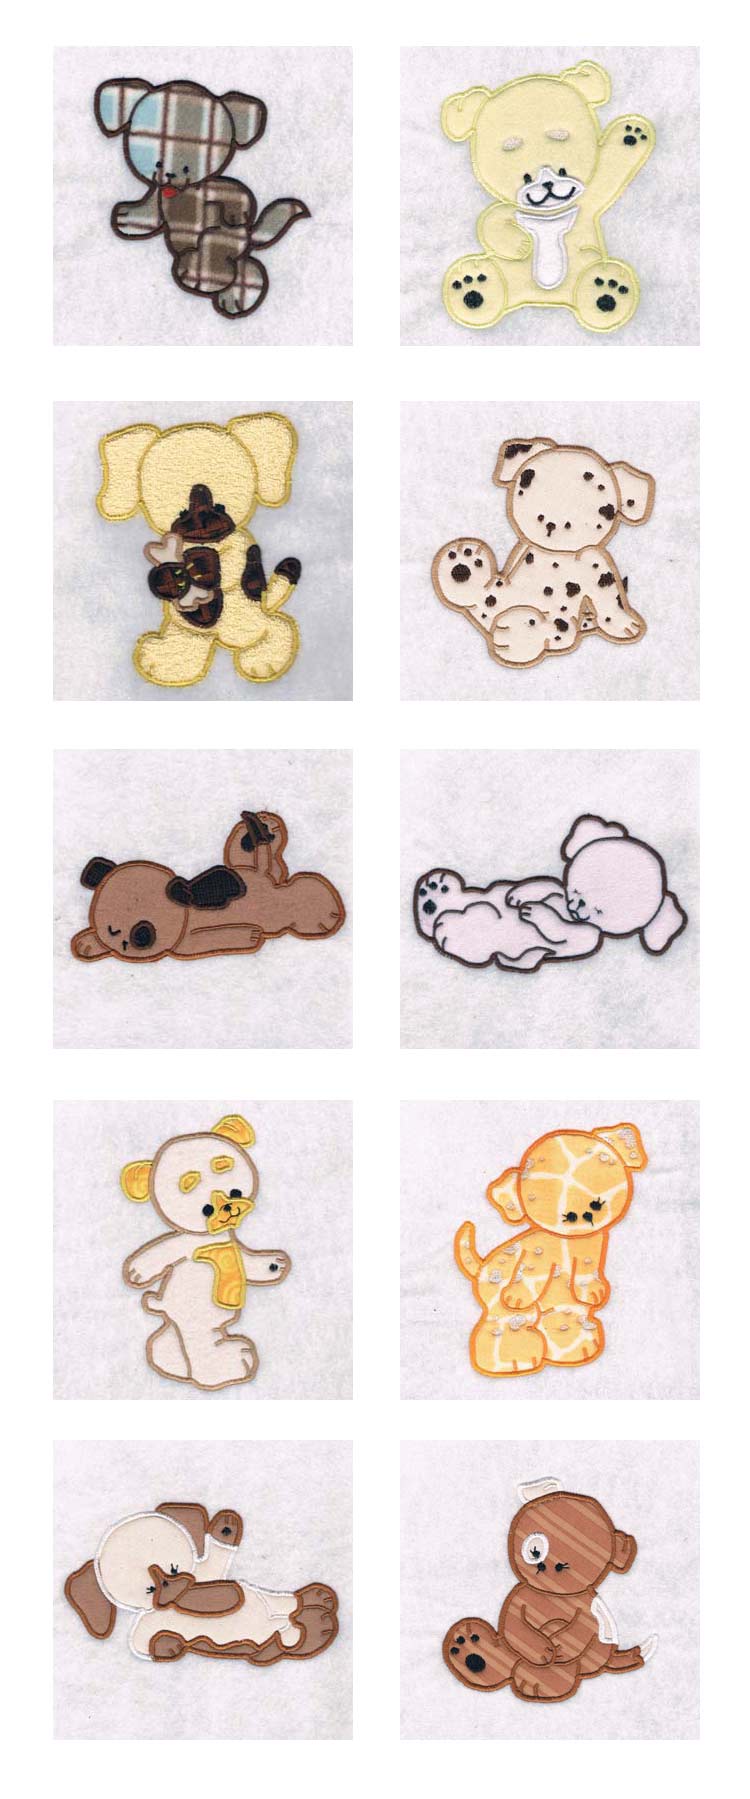 Cute Puppies Embroidery Machine Design Details